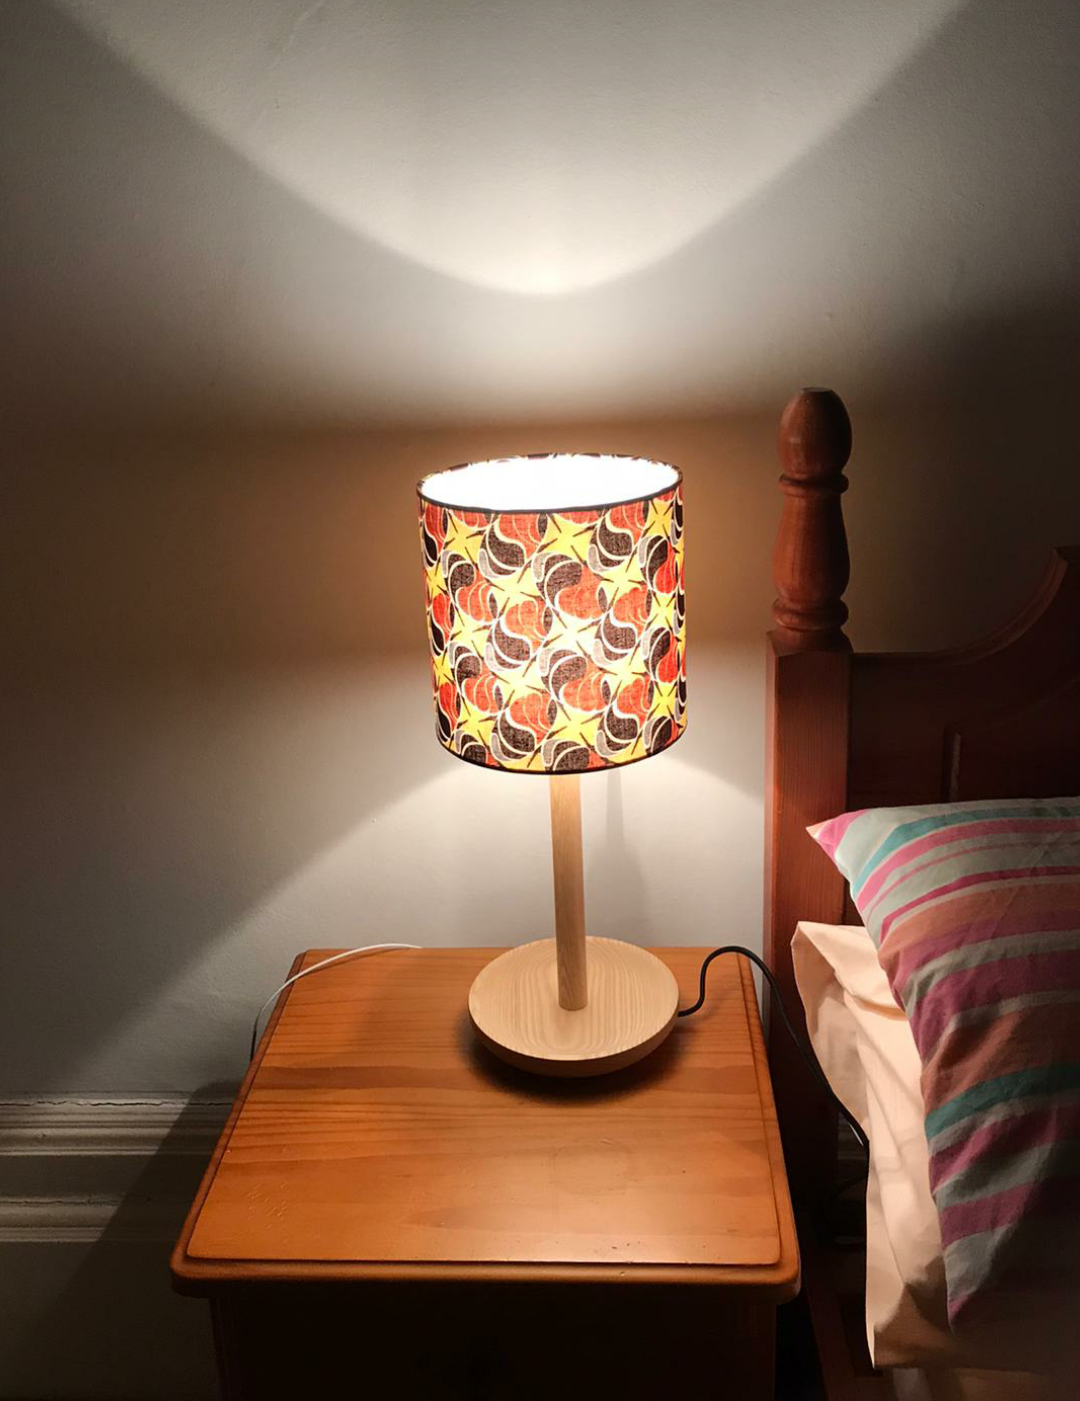 Small bedside table patterned with mixed brown & yellow seeds on an African print fabric. The light is switched on too